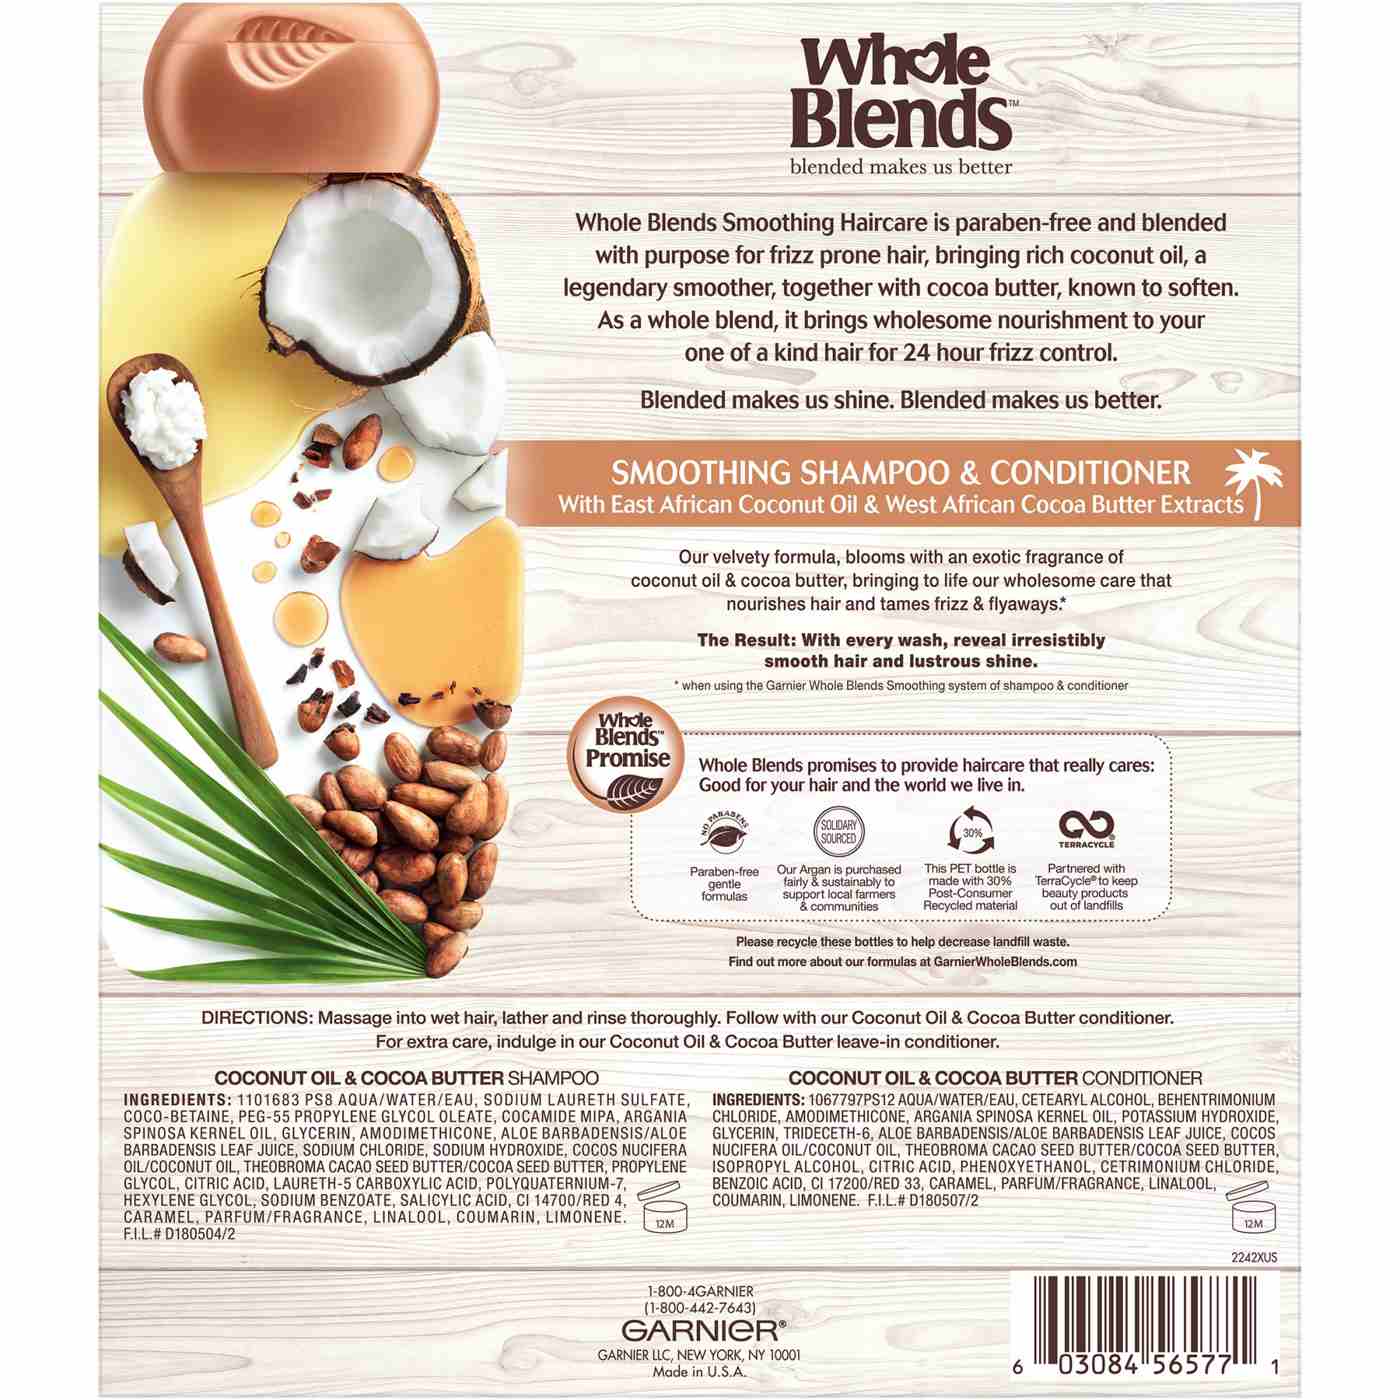 Garnier Whole Blends Smoothing Shampoo & Conditioner with Coconut Oil & Cocoa Butter; image 2 of 3